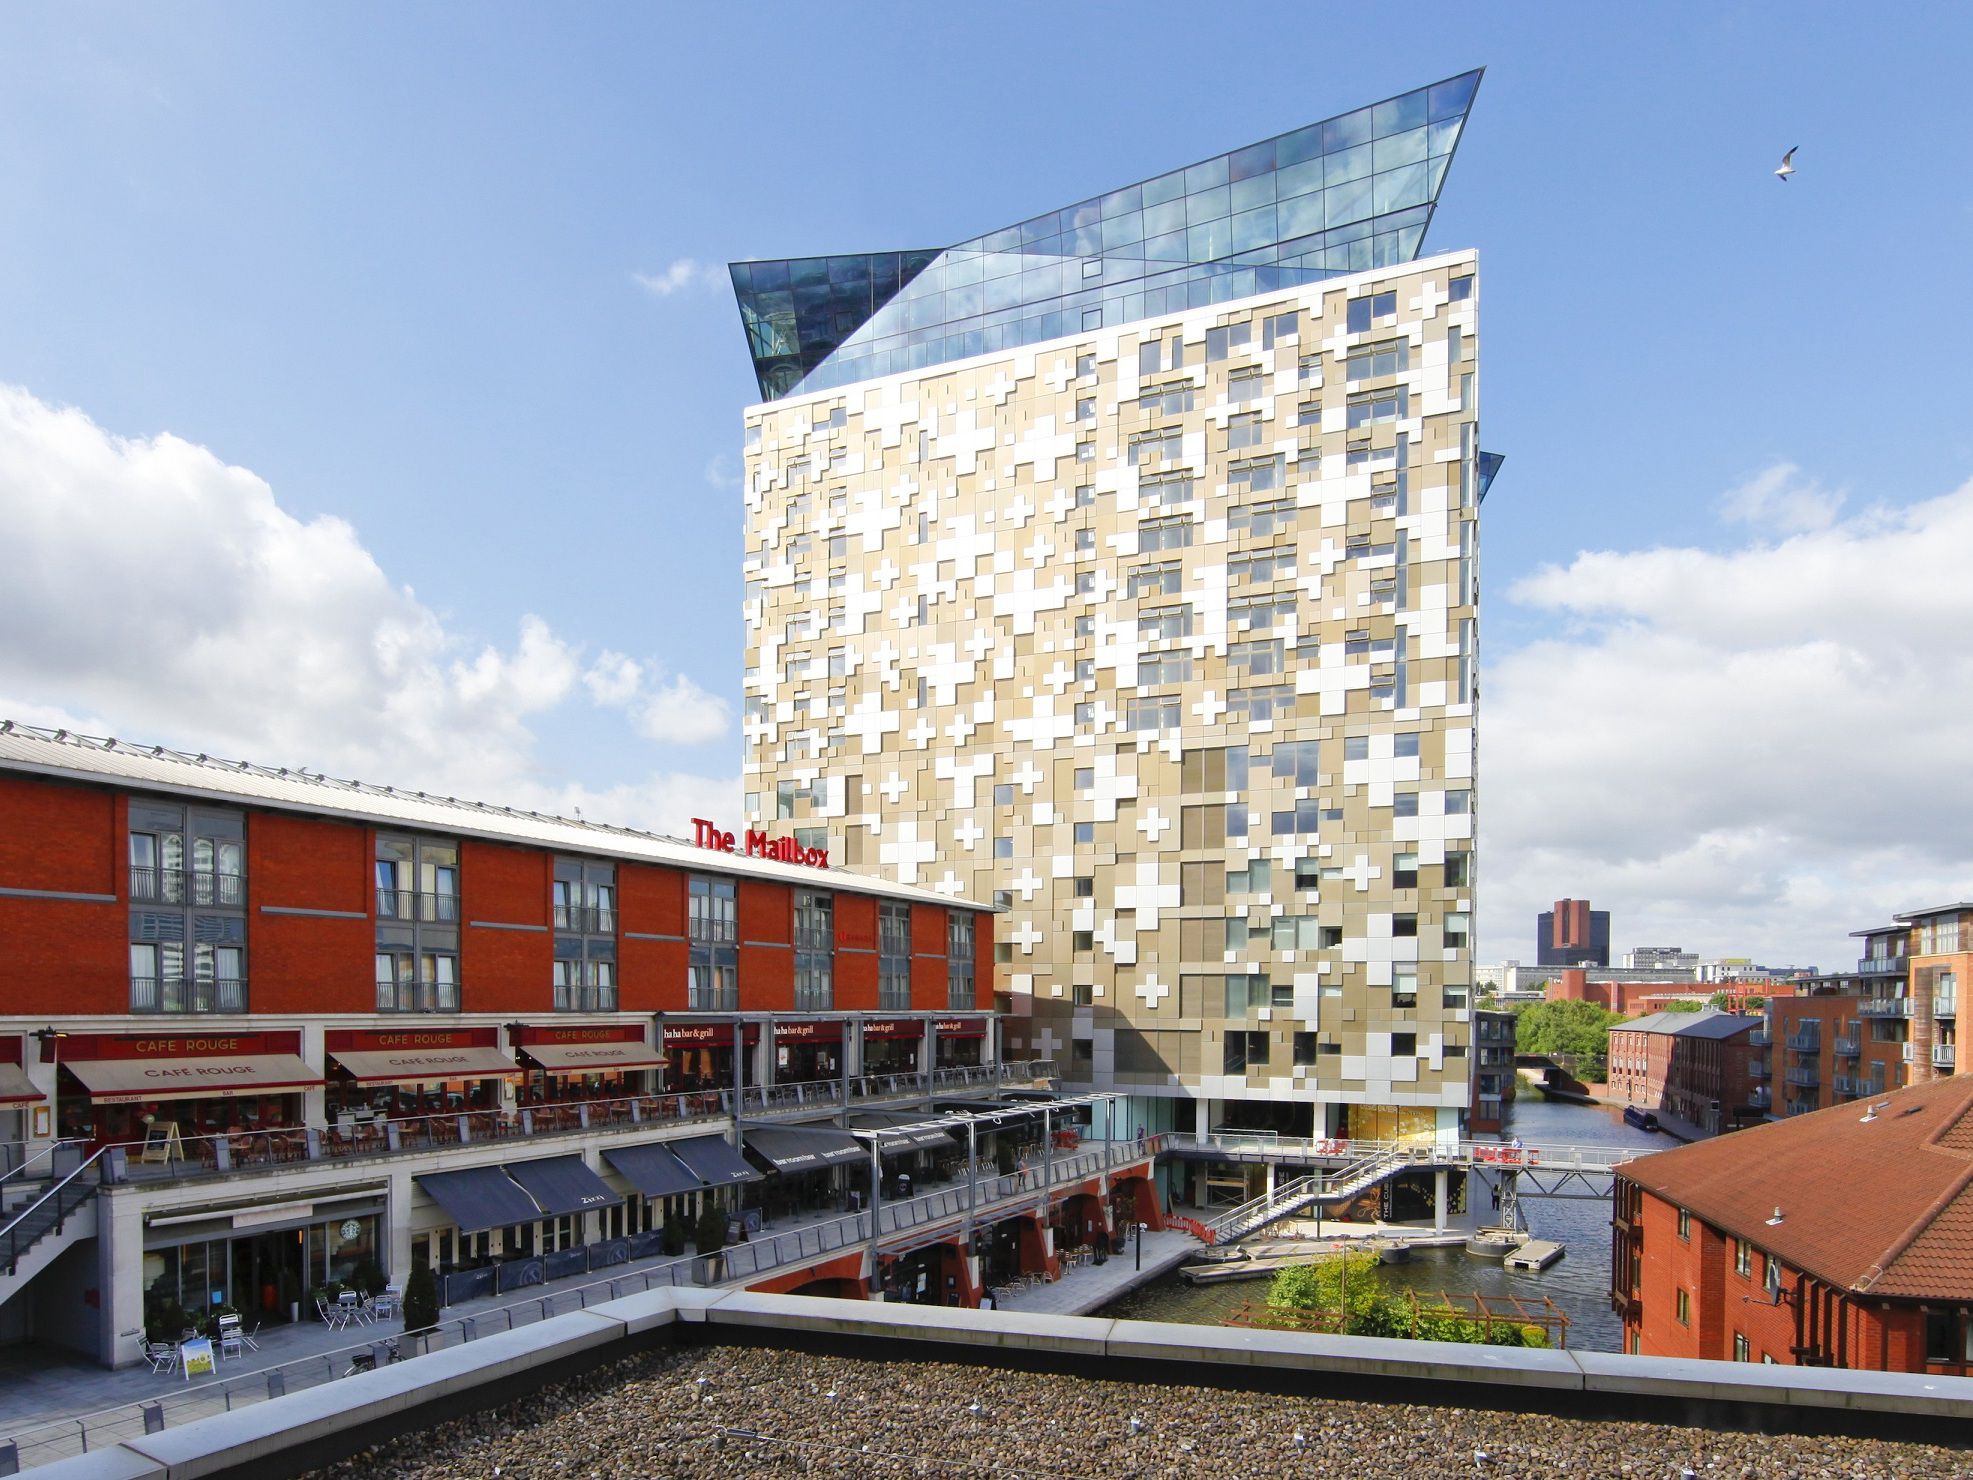 Operator of well-known city centre hotel enters administration but trading continues